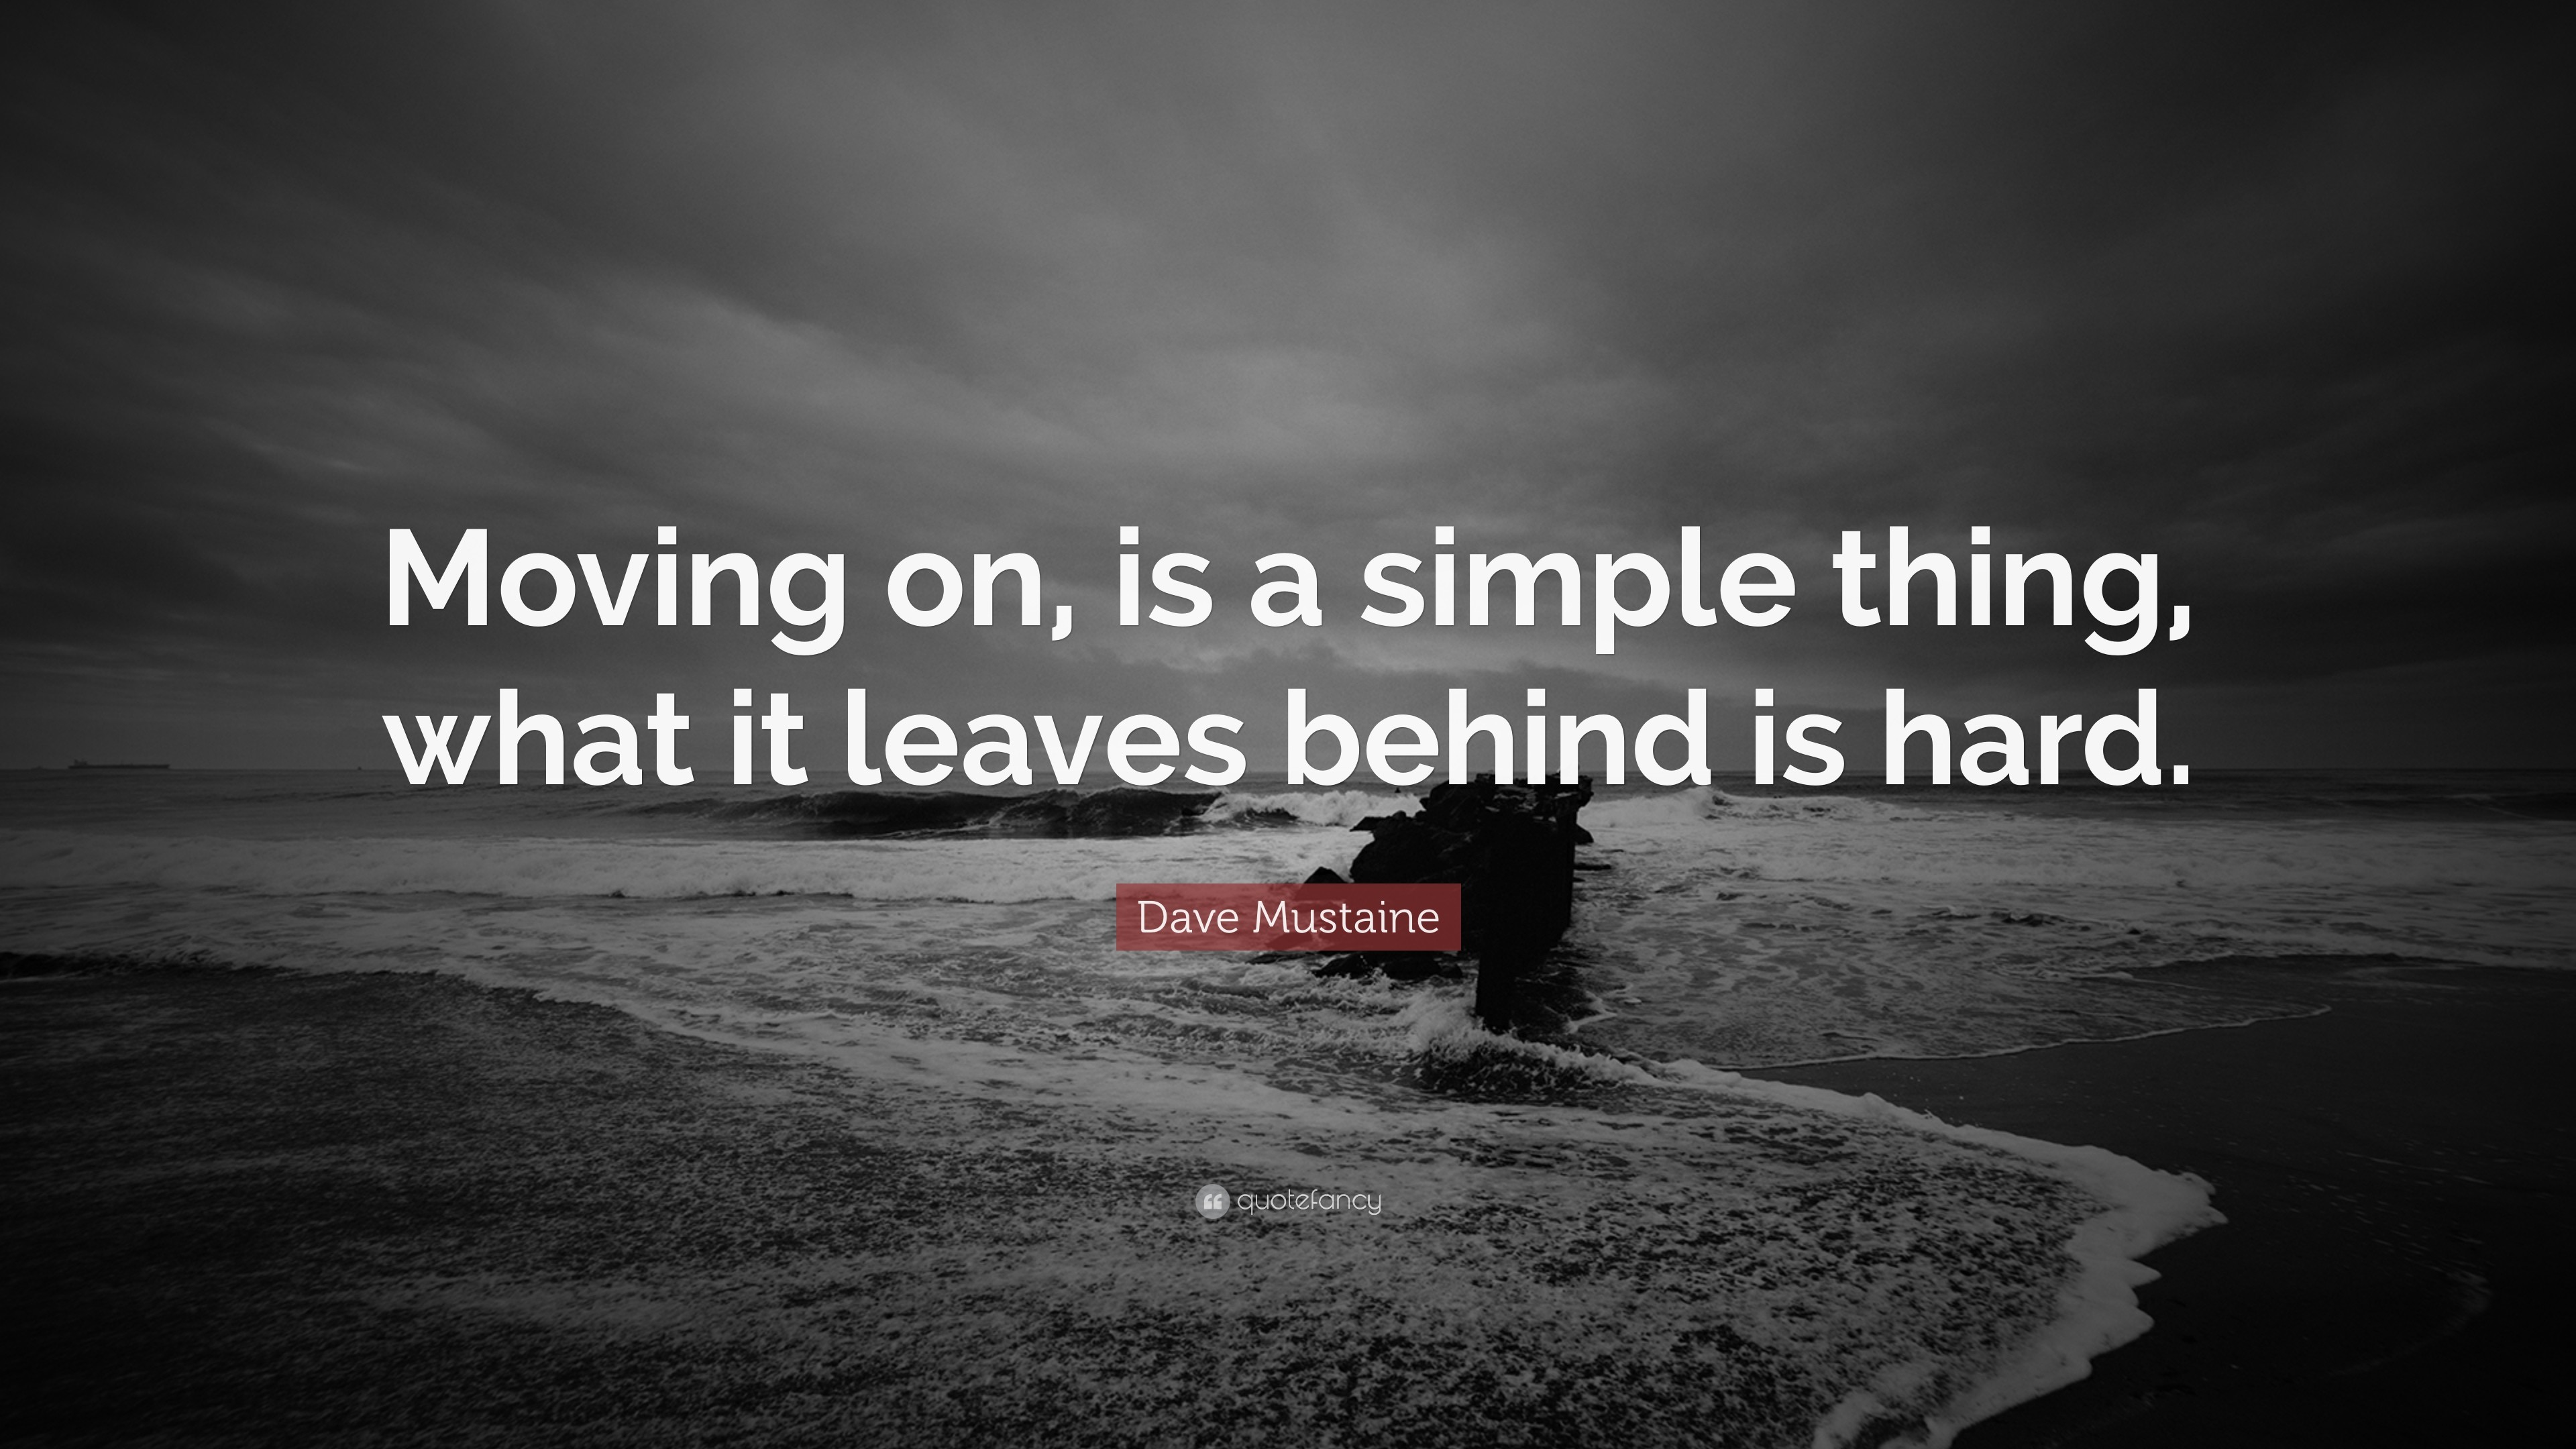 3840x2160 Dave Mustaine Quote: “Moving on, is a simple thing, what it leaves